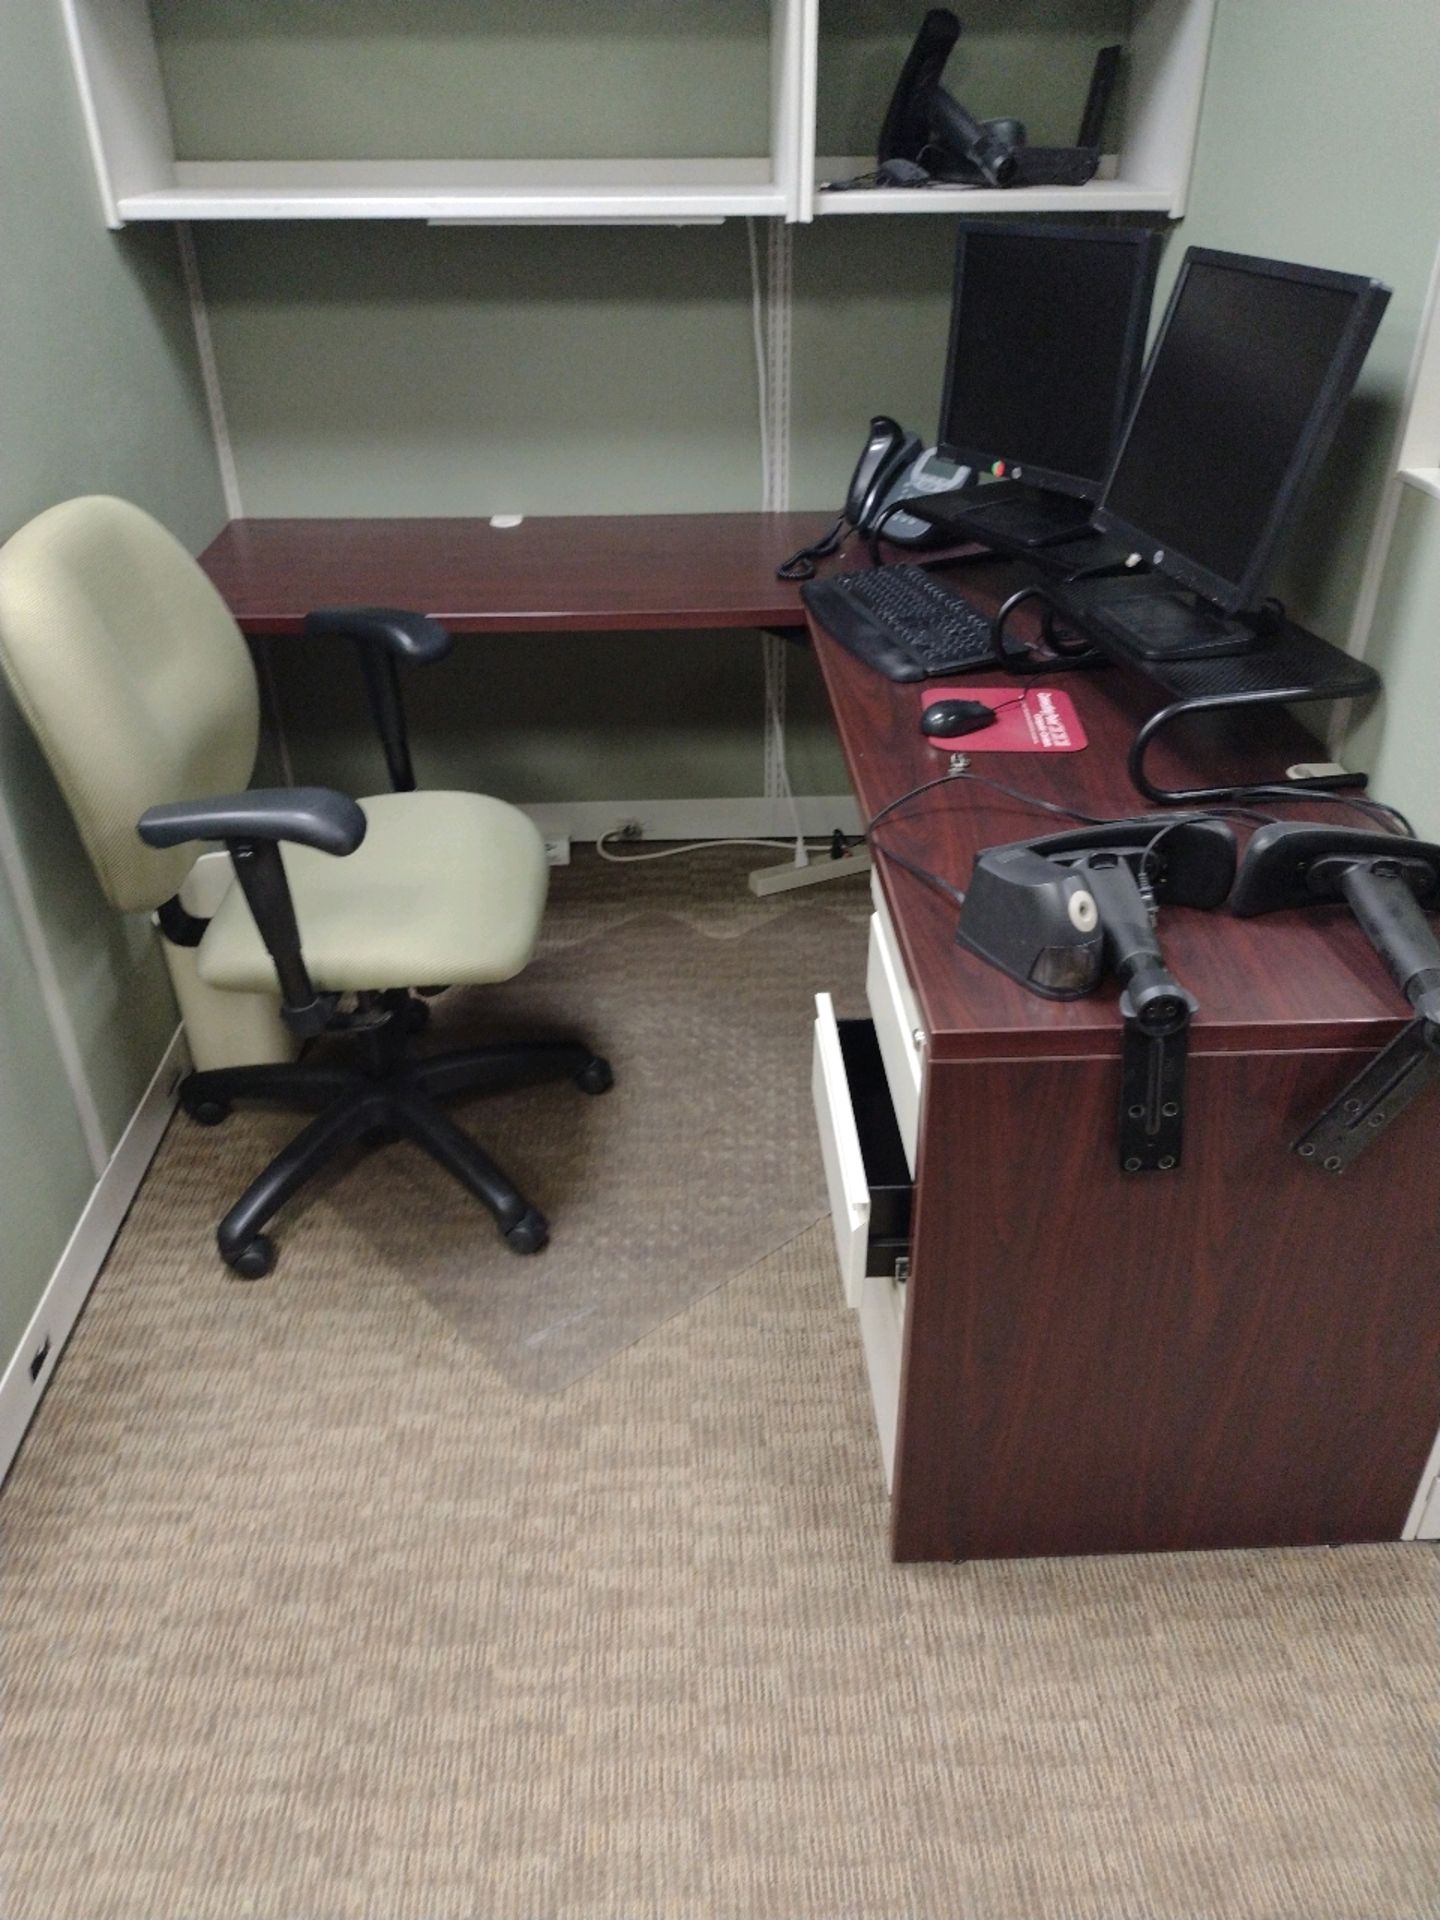 OFFICE SUITE TO INCLUDE: 8 WORK STATION MODULAR CUBICLE SYSTEM WITH CHAIRS, PRINTERS, MONITORS, - Image 6 of 16